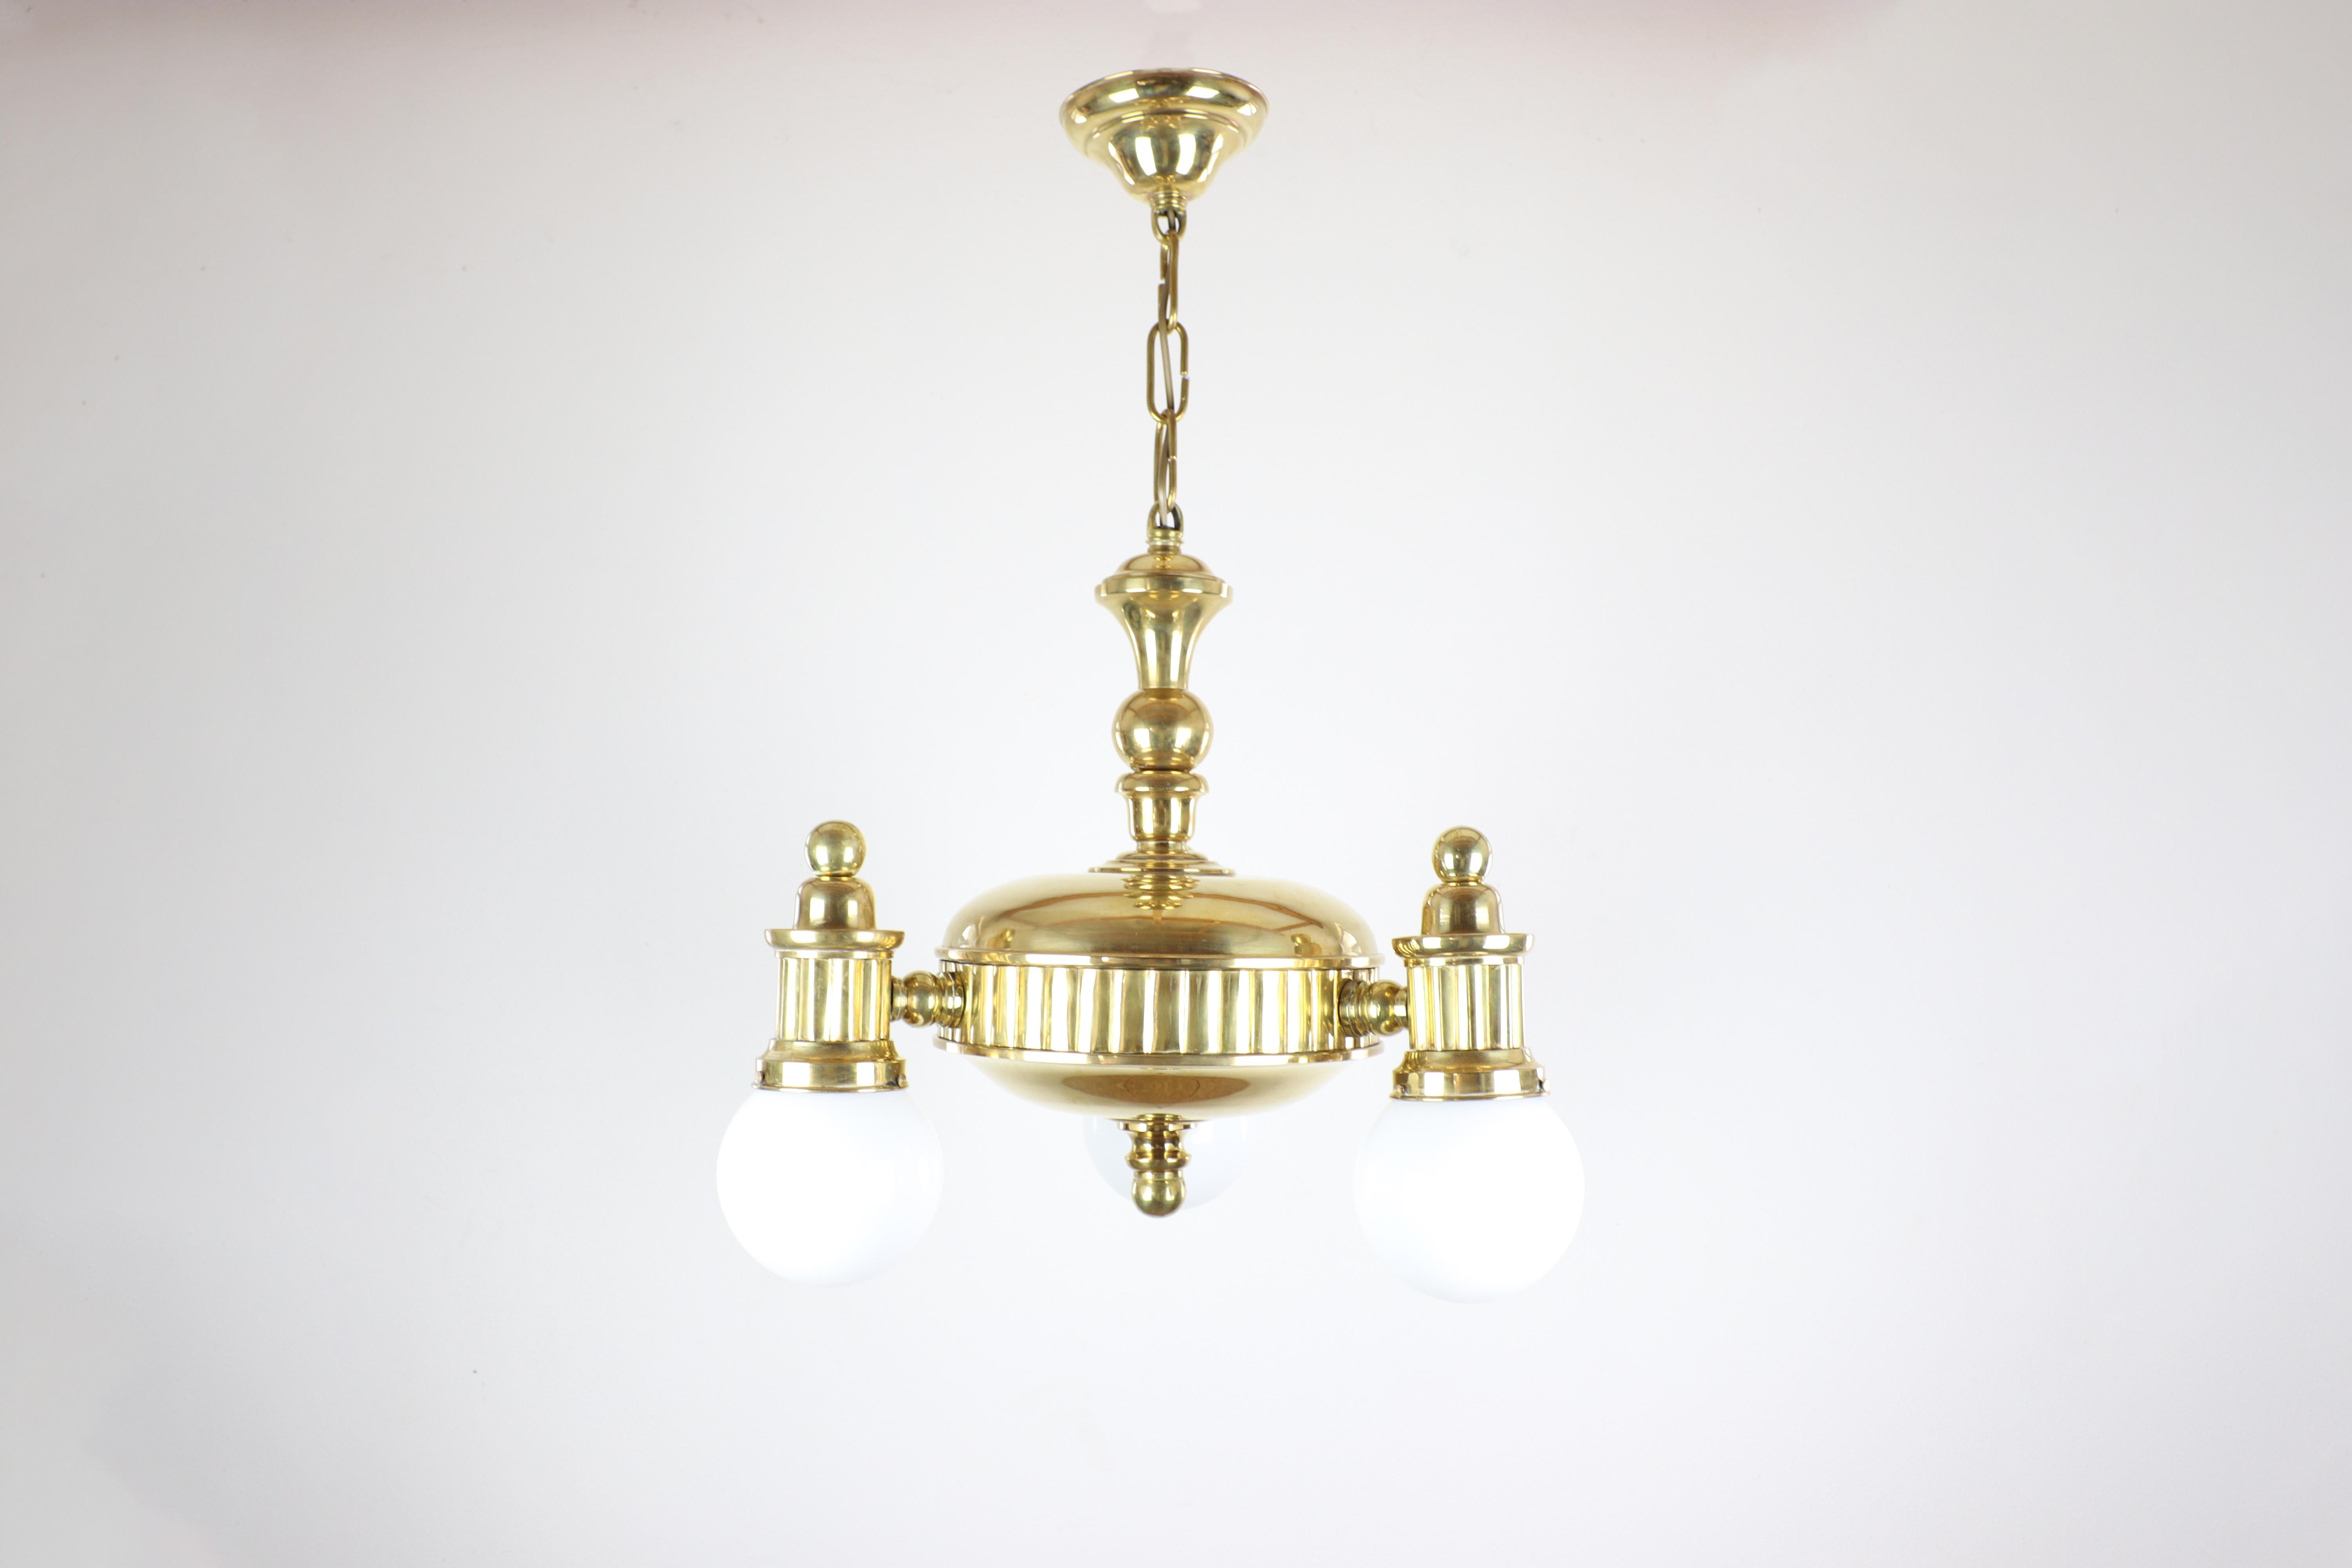 Exclusive Art Deco Chandelier with Swivel Arms 'Three-Arm Design' For Sale 2